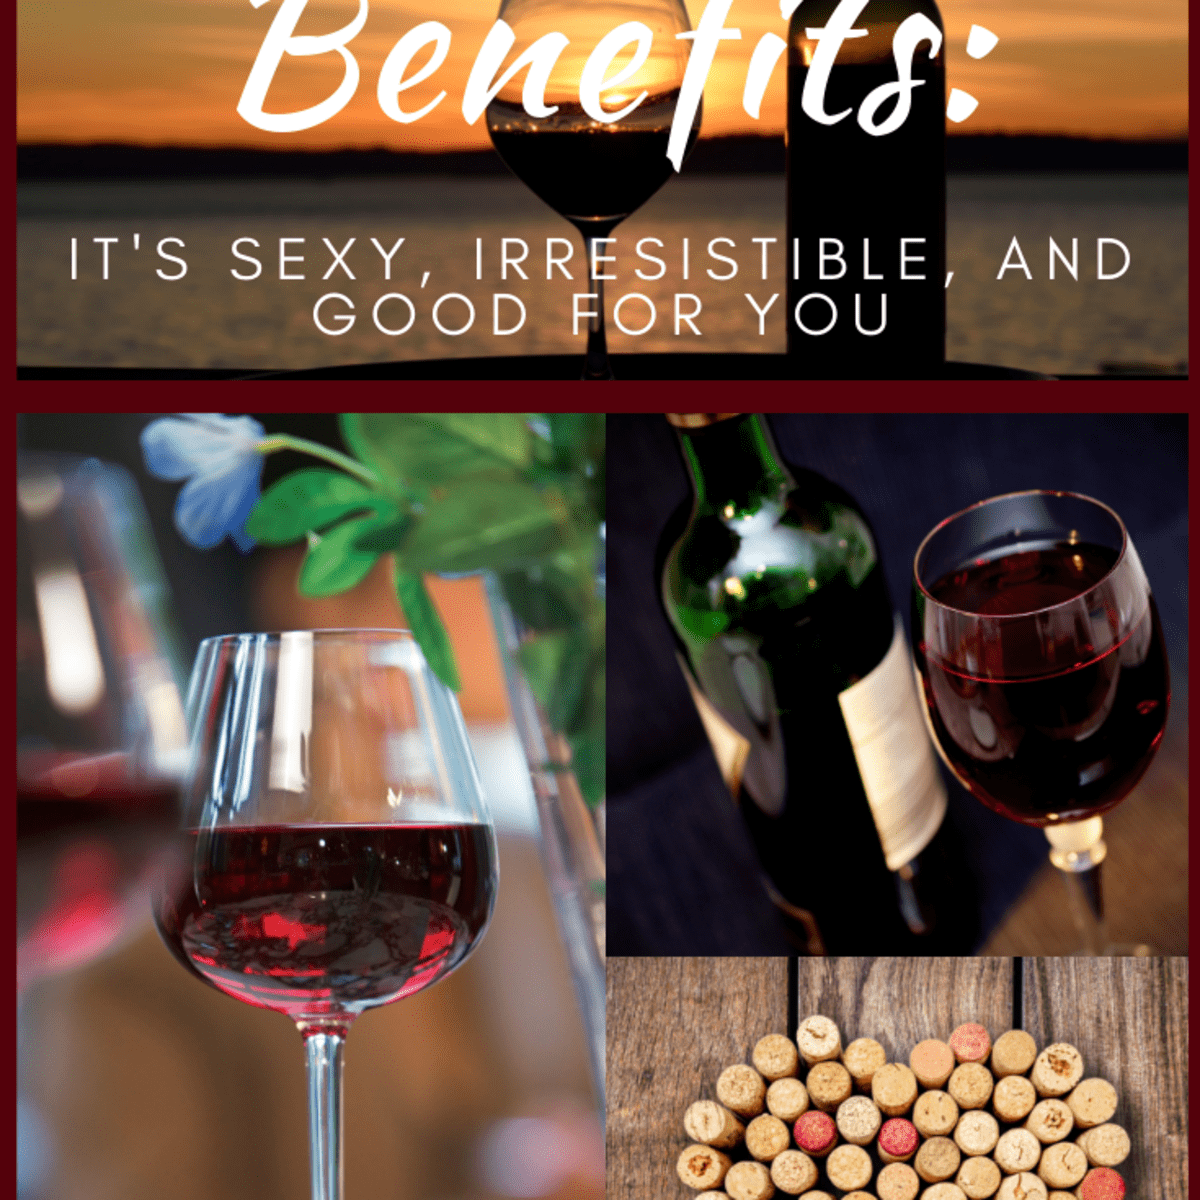 Red Wine Benefits Its Sexy, Irresistible, and Good for